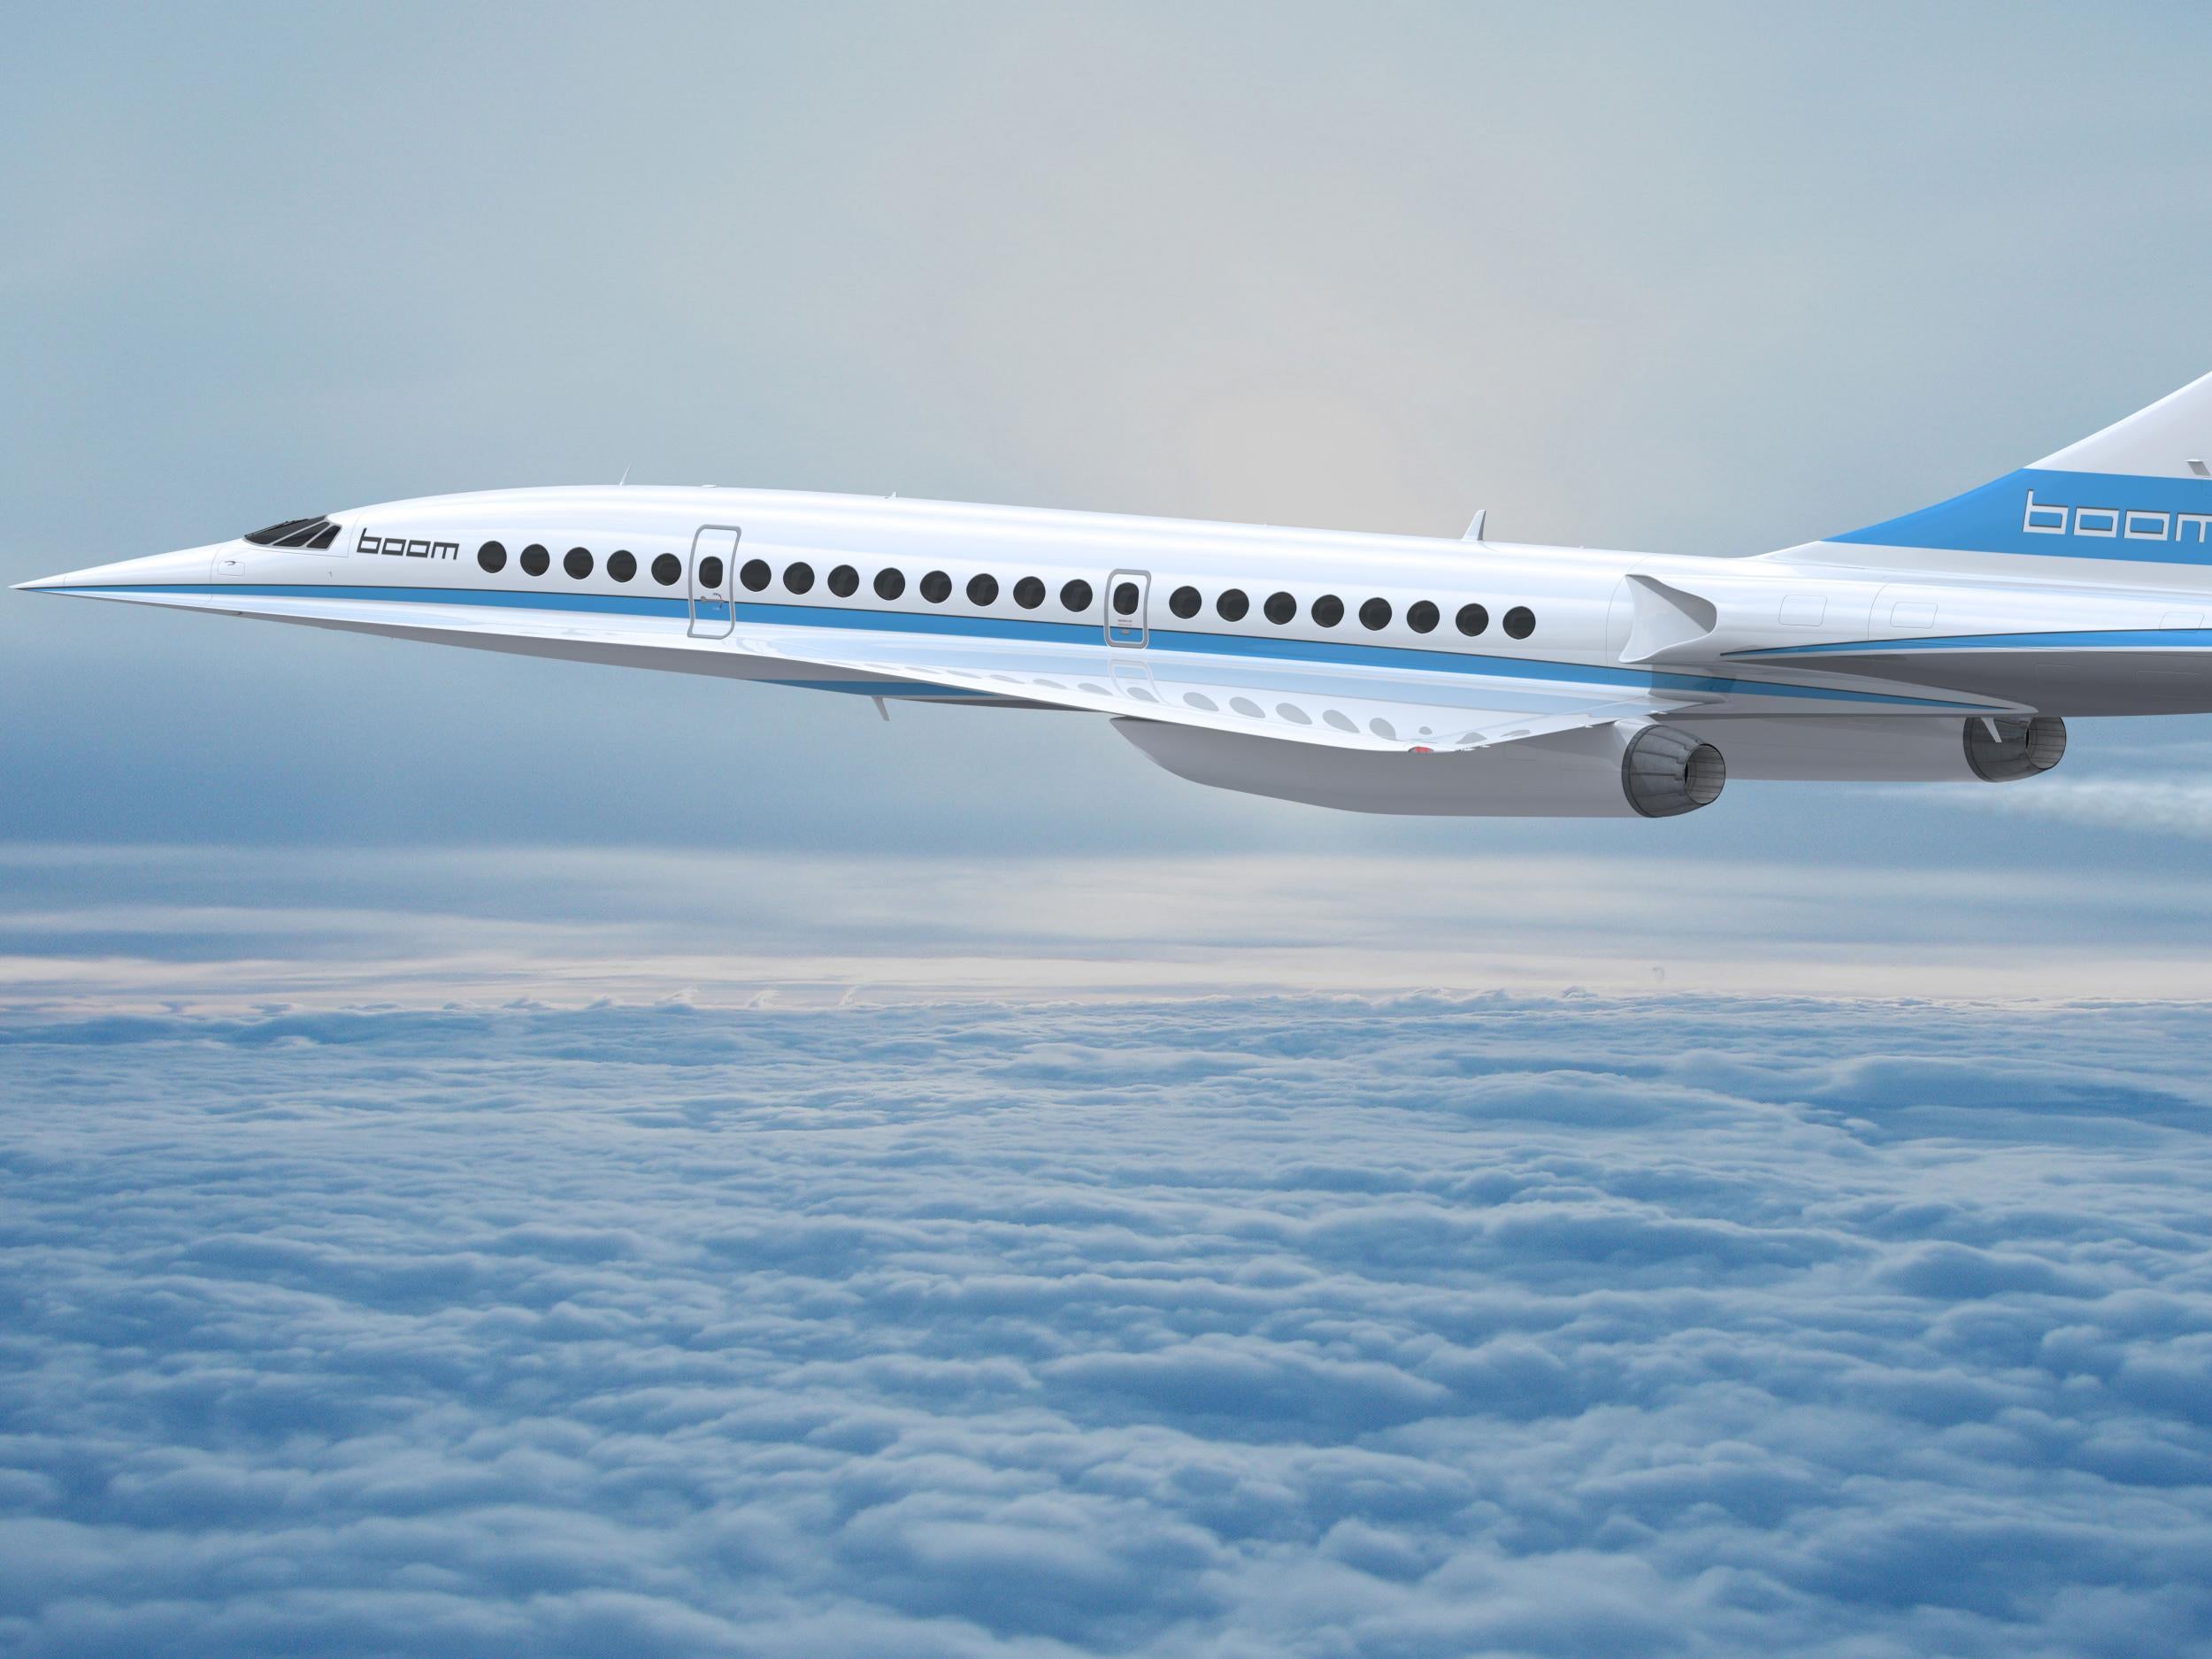 Nicknamed ‘Baby Boom’, the new aircraft can fly between London and New York in just over three&nbsp;hours